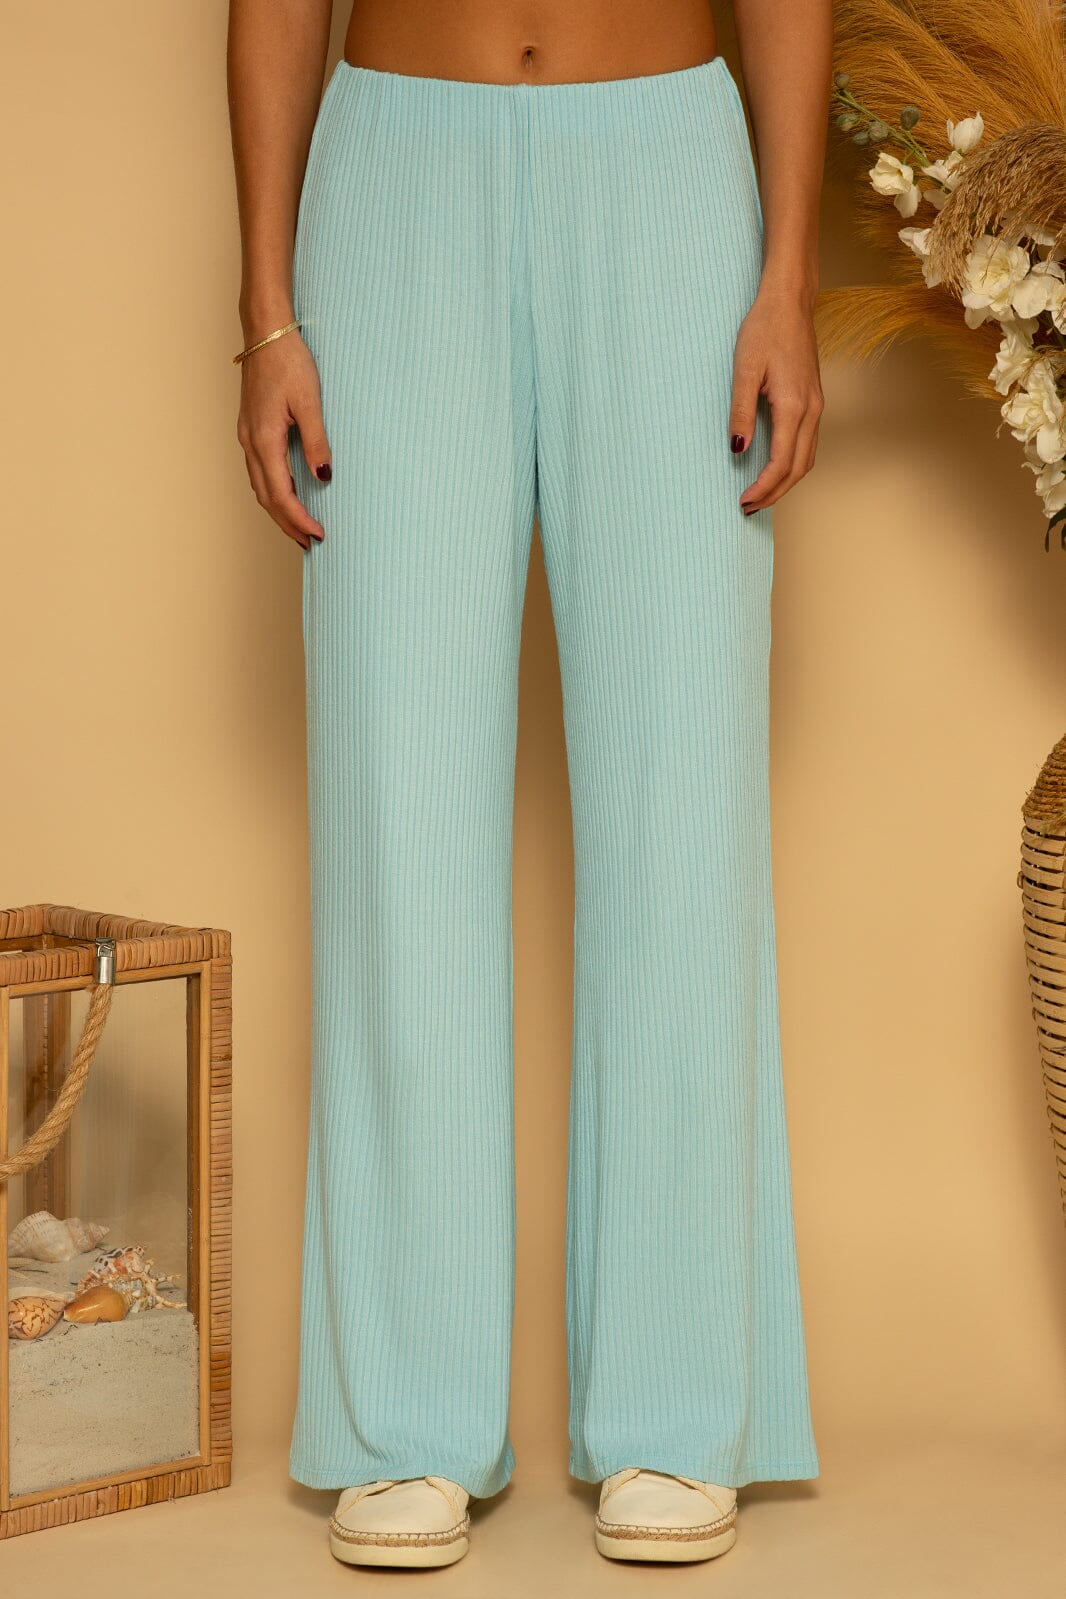 RIBBED PULL ON PANT - SKY - XS